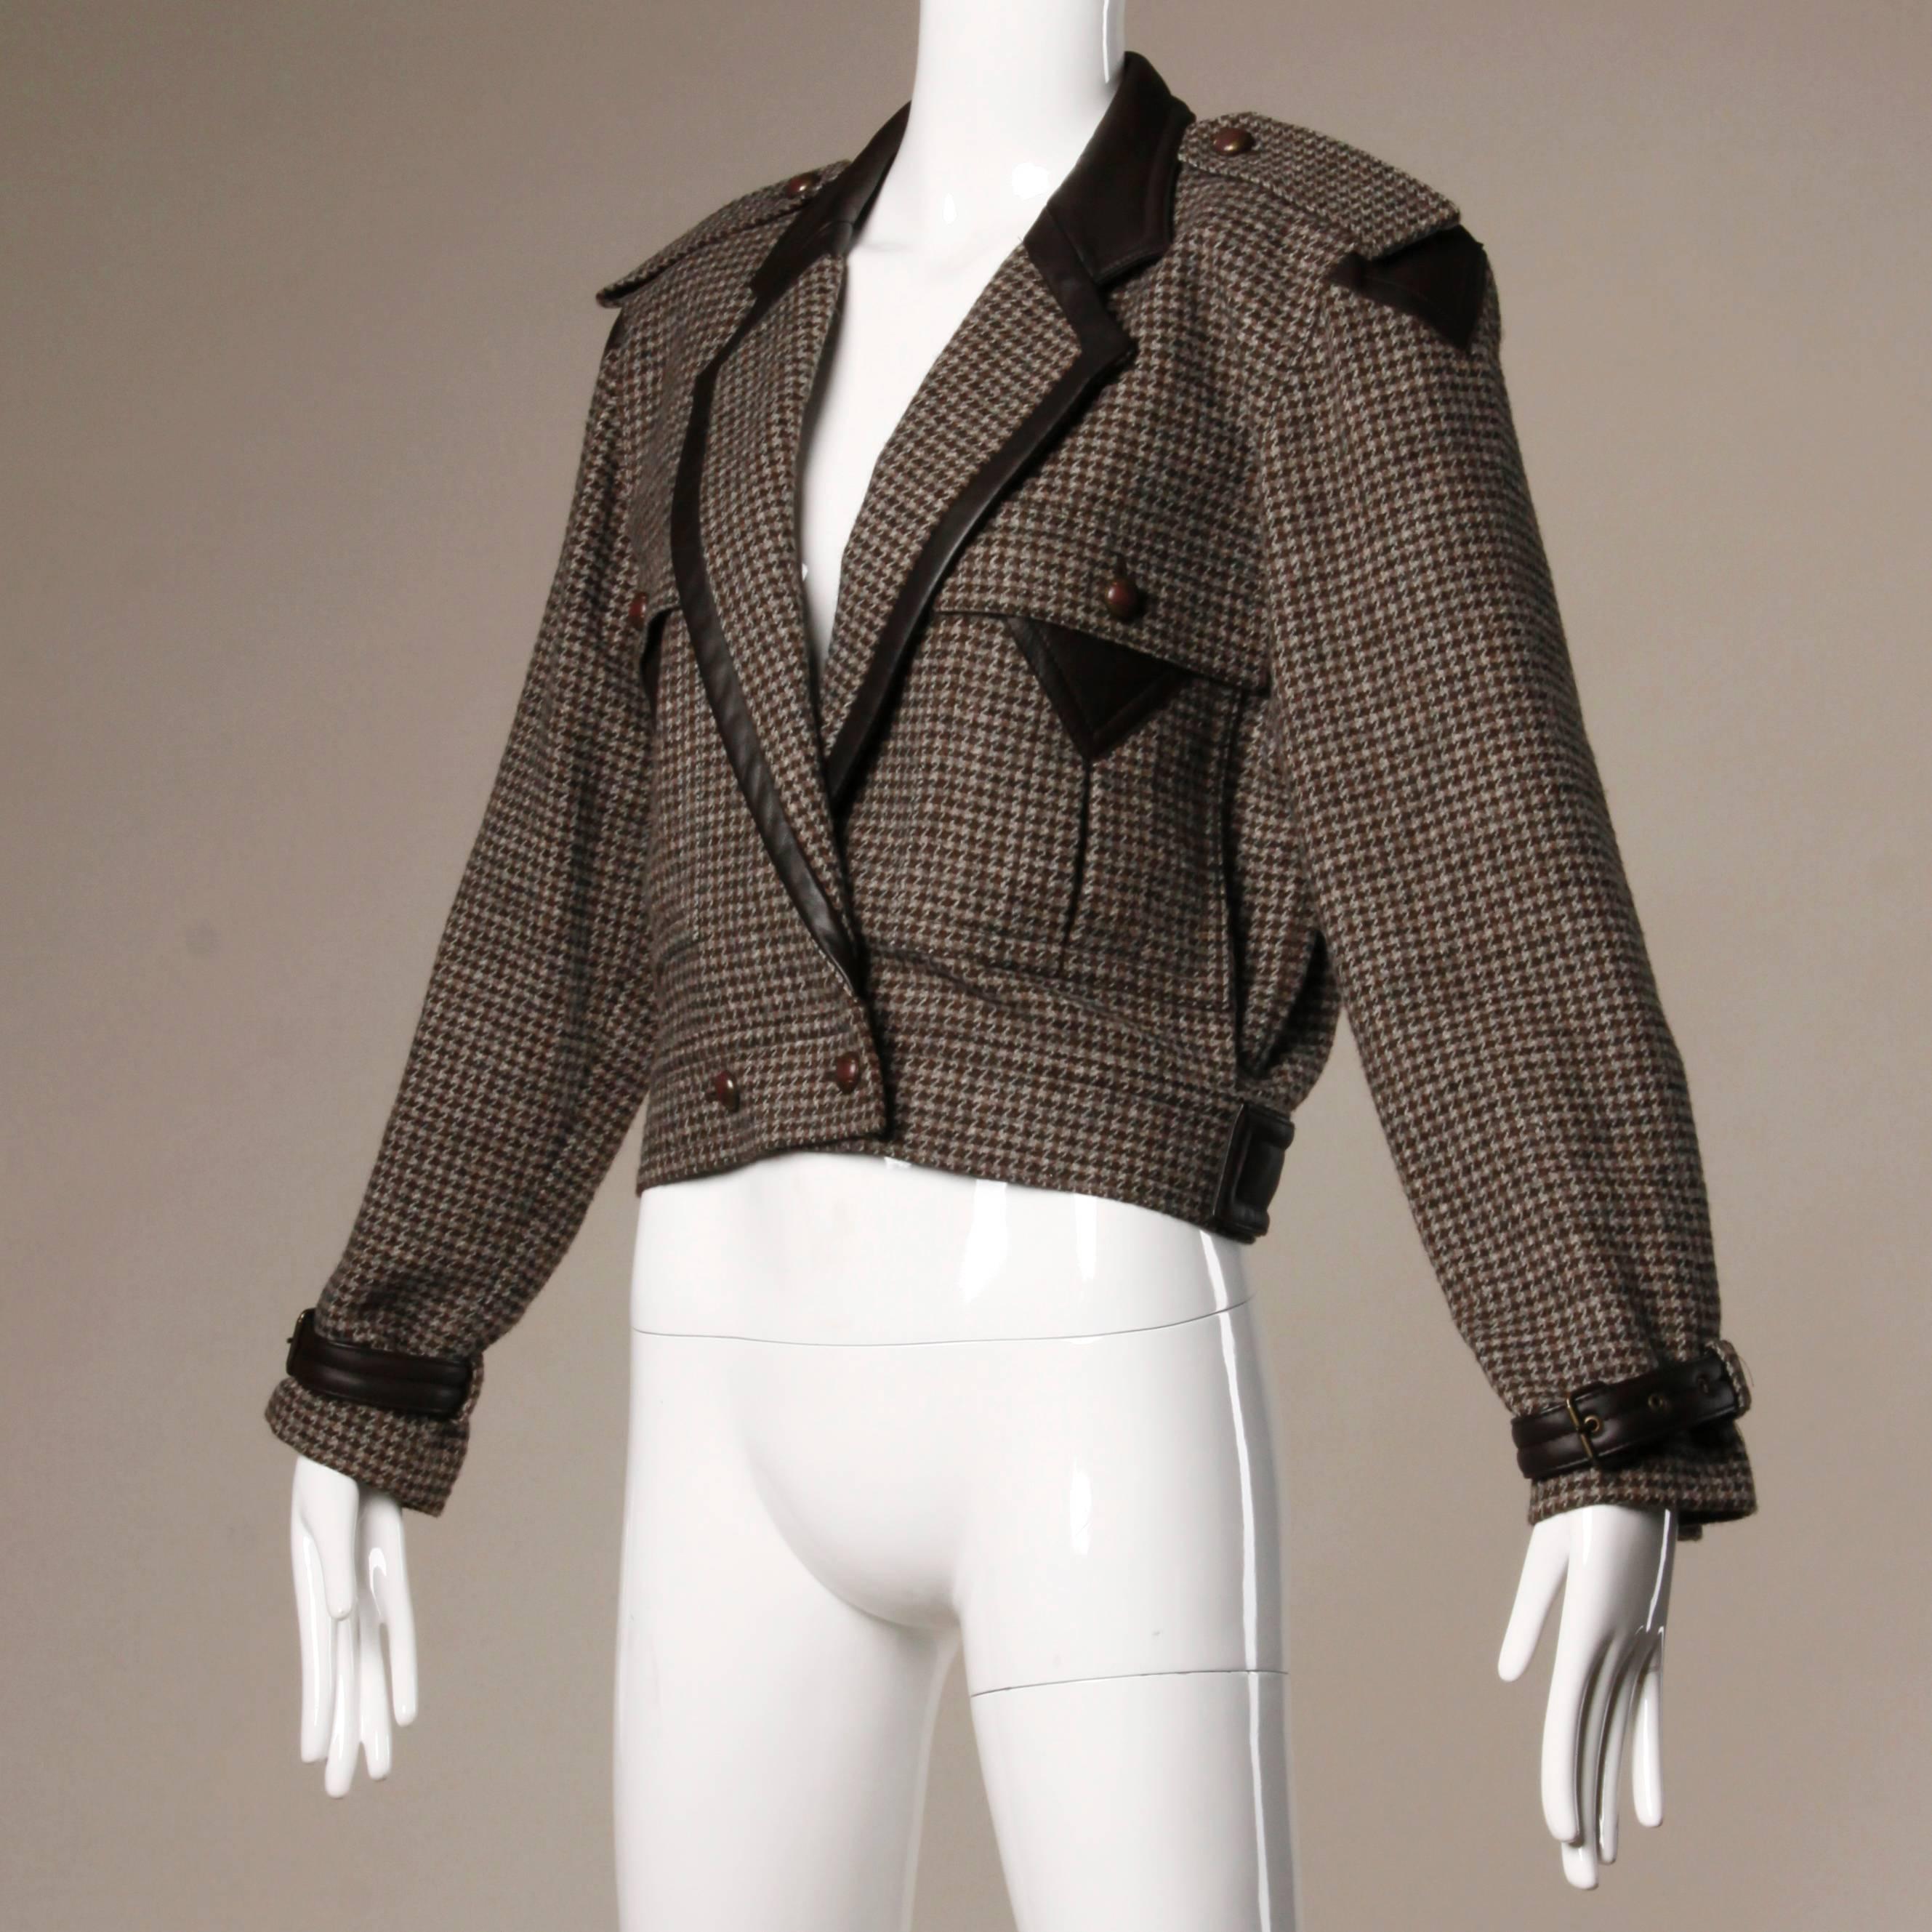 Vintage Escada alpaca and wool tweed jacket with buttery leather trim. Appears to be unworn with the original tags in the pocket.

Details:

Fully Lined
Chest Pockets
Shoulder Pads Sewn Into Lining
Front Button Closure
Marked Size: 38